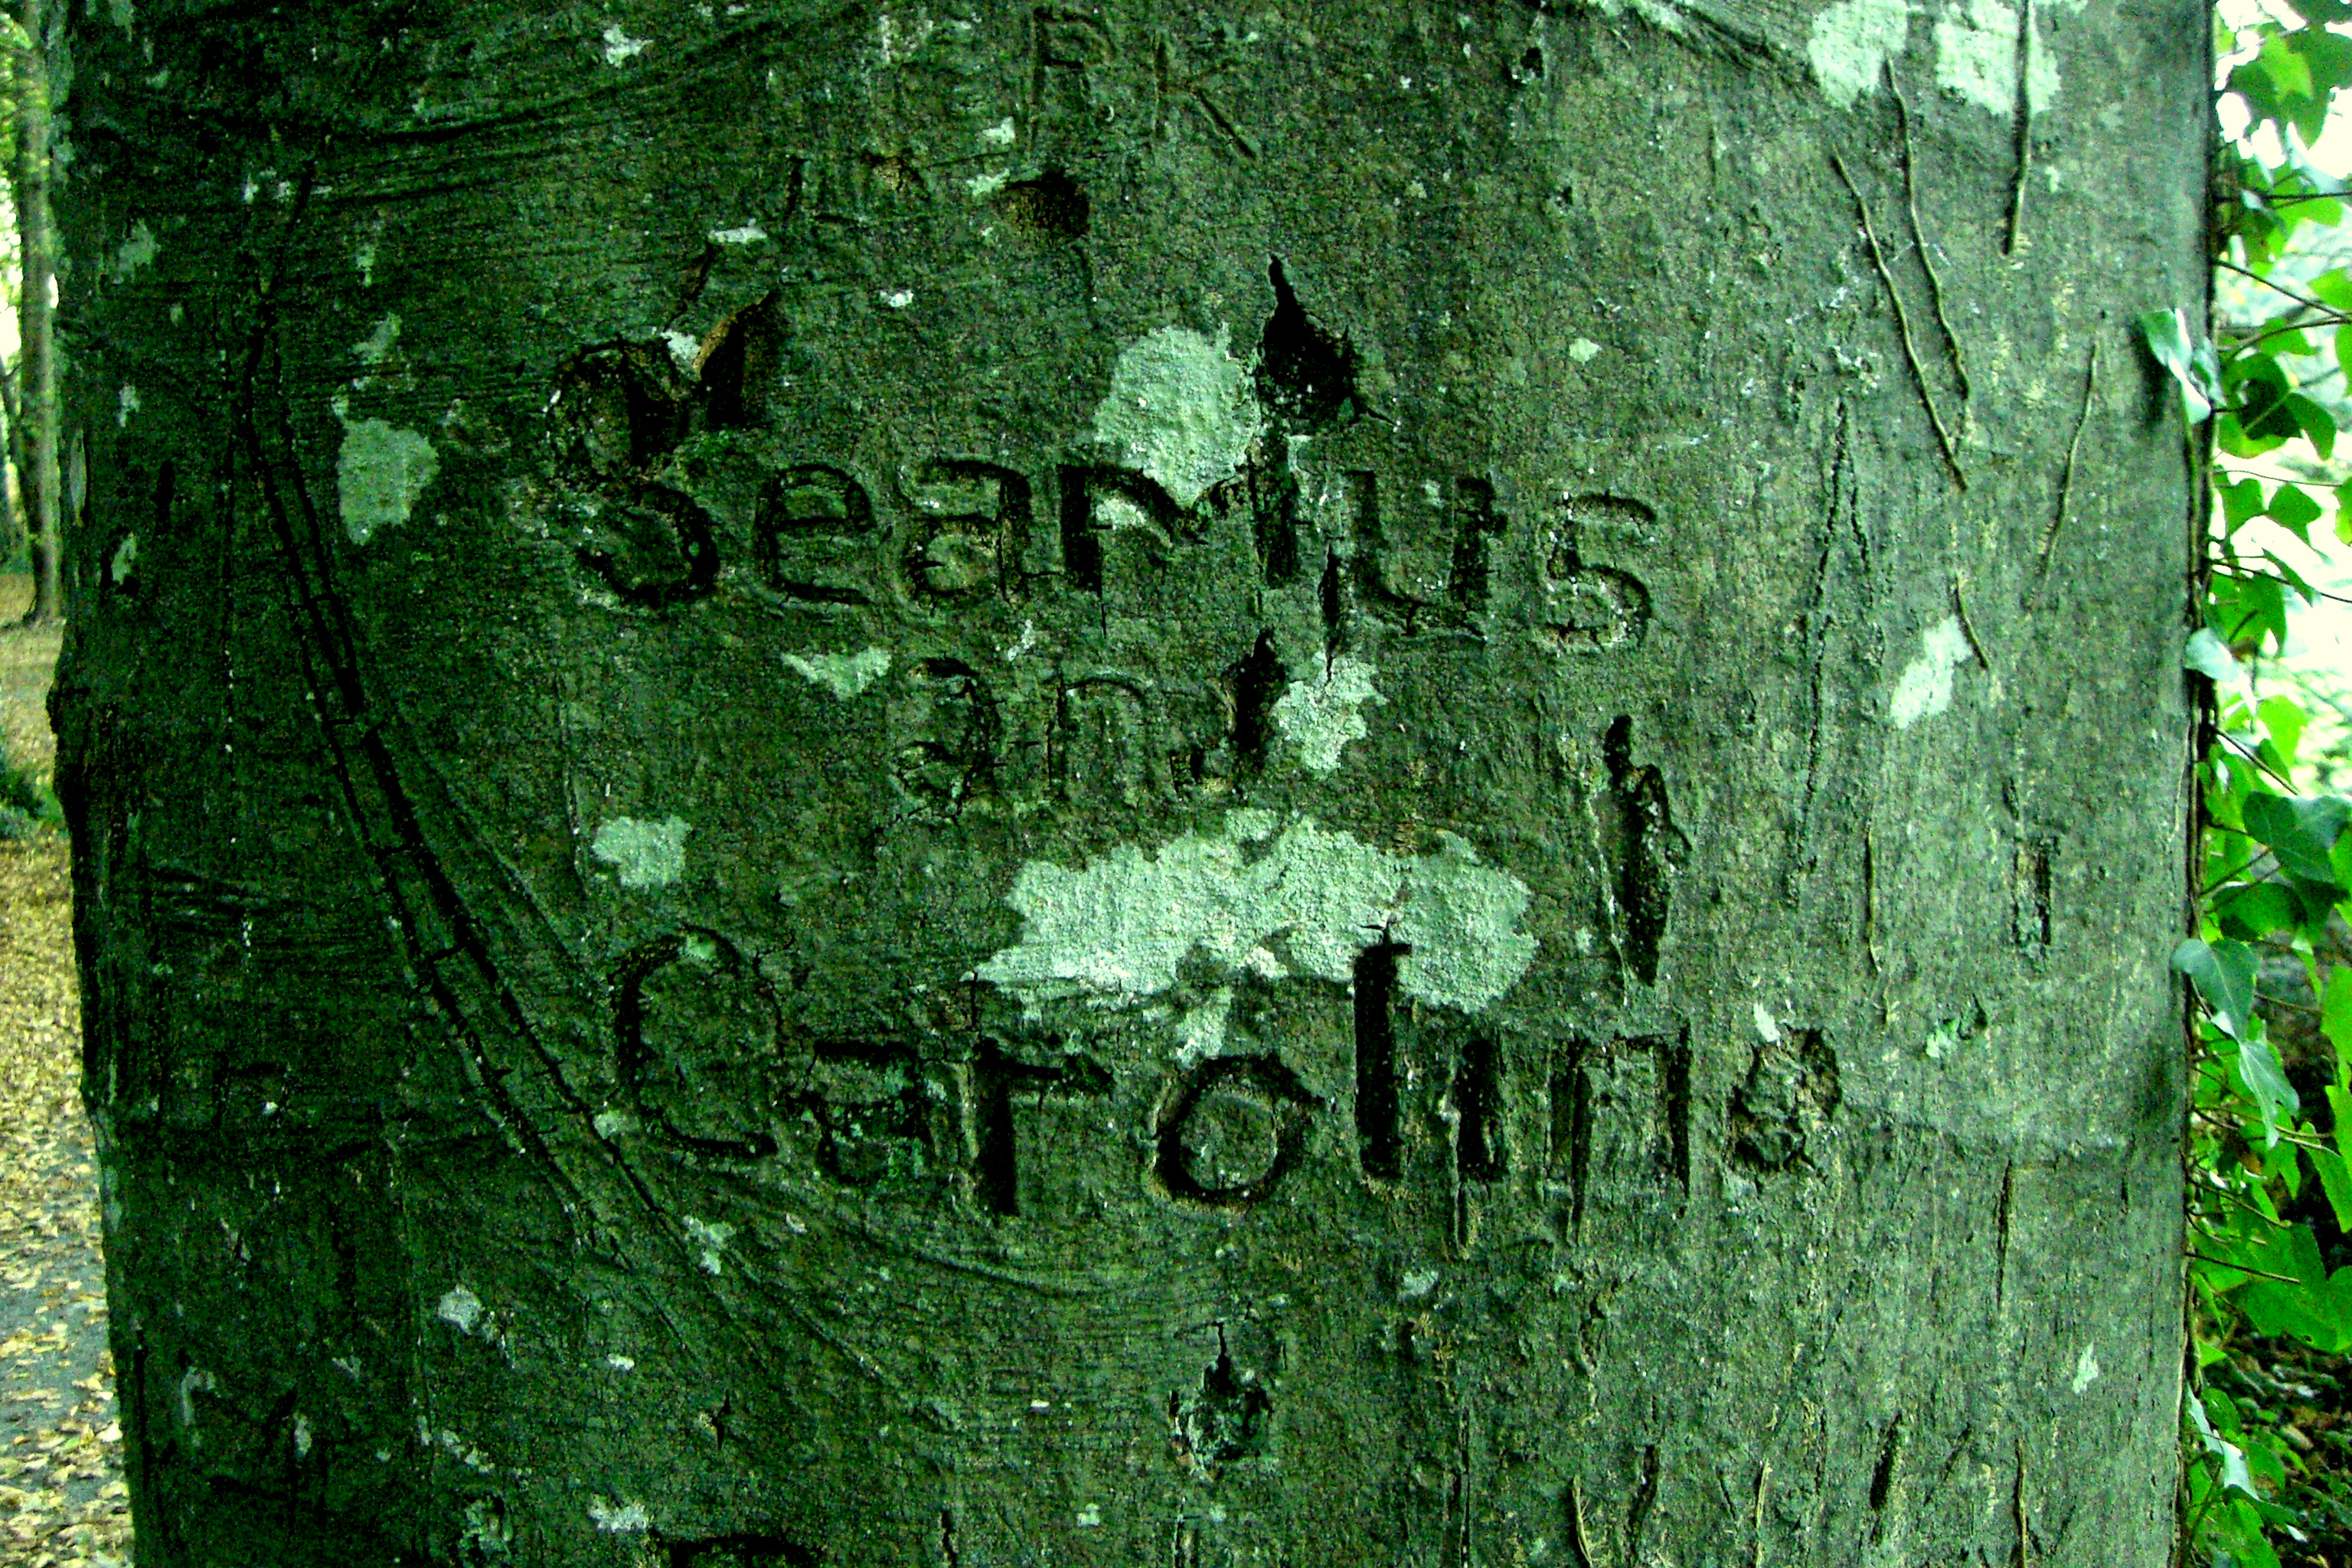 Carved in tree, Carving, Eternal, Green, Love, HQ Photo